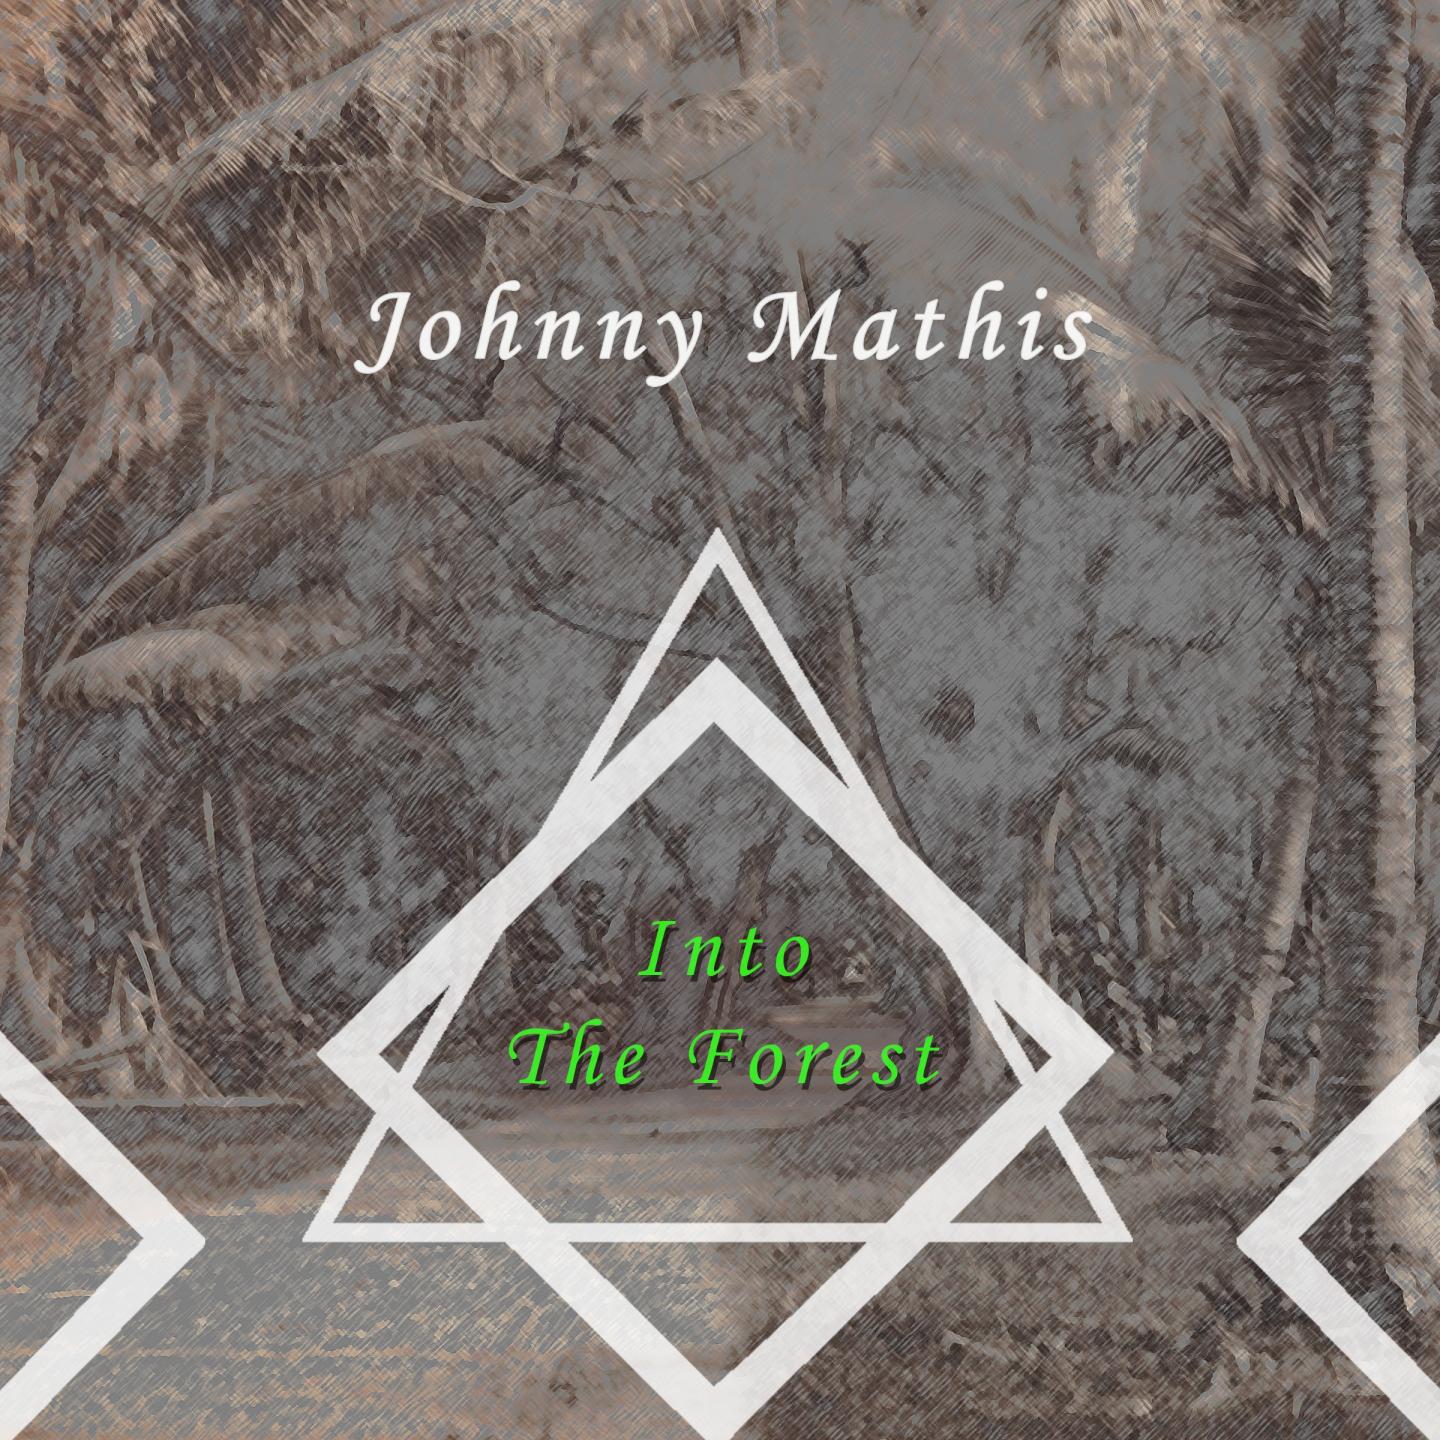 Johnny Mathis - When You Wish Upon A Star